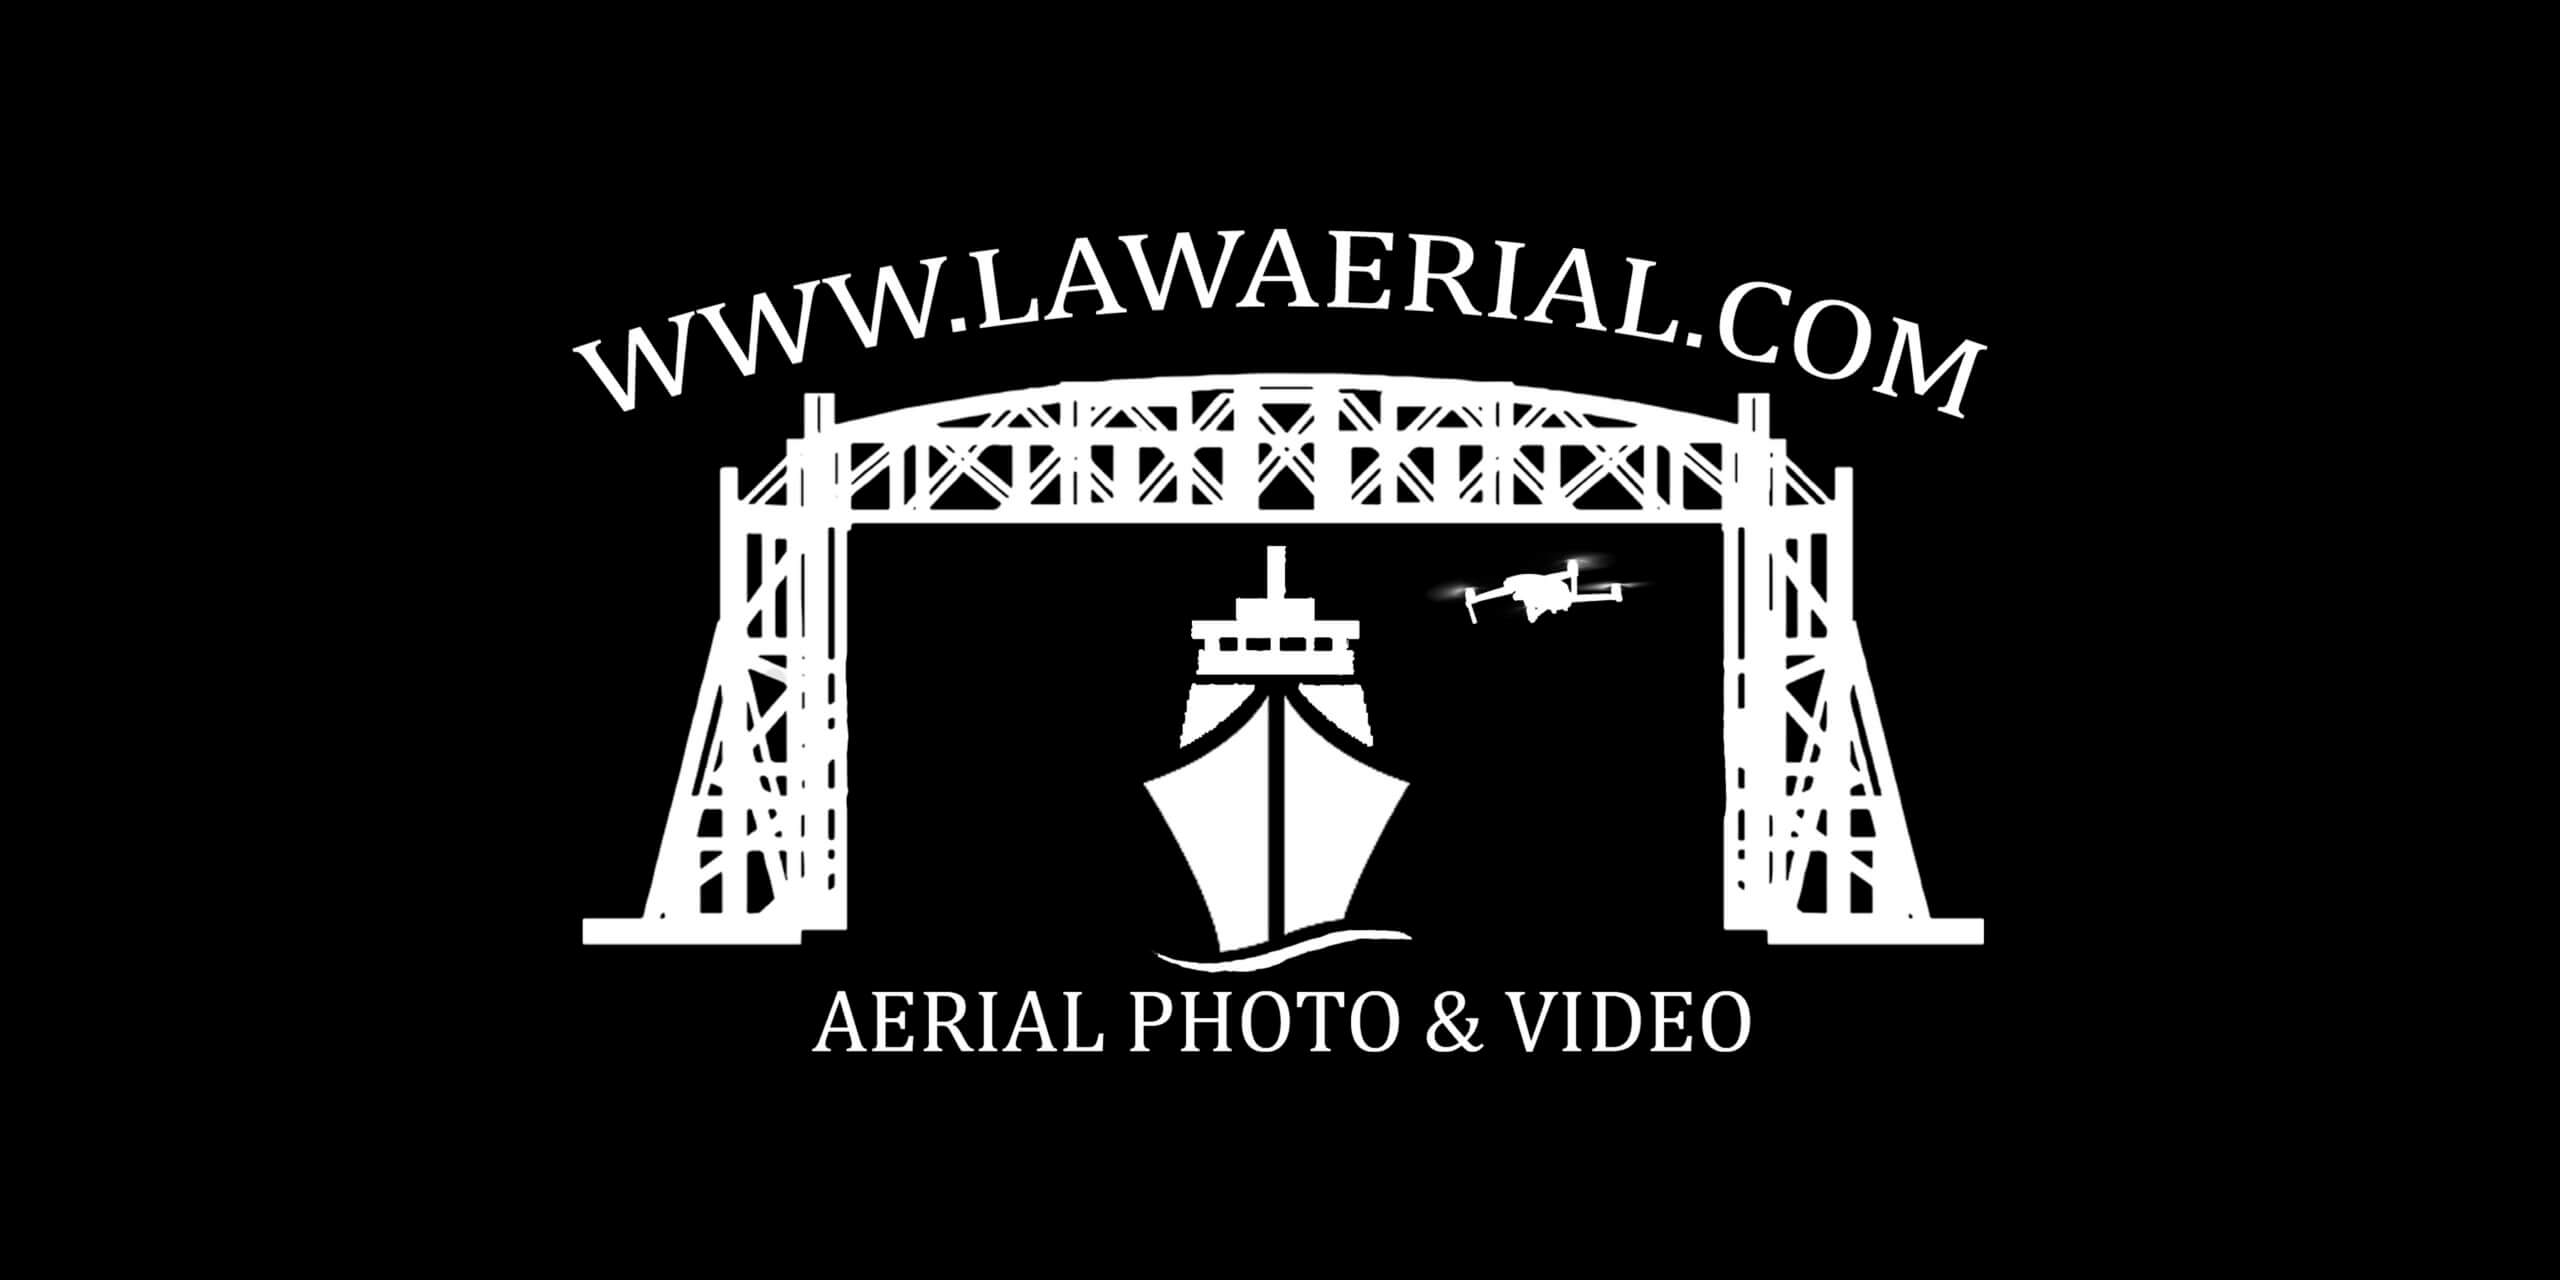 Law-Aerial-Banner-2-scaled